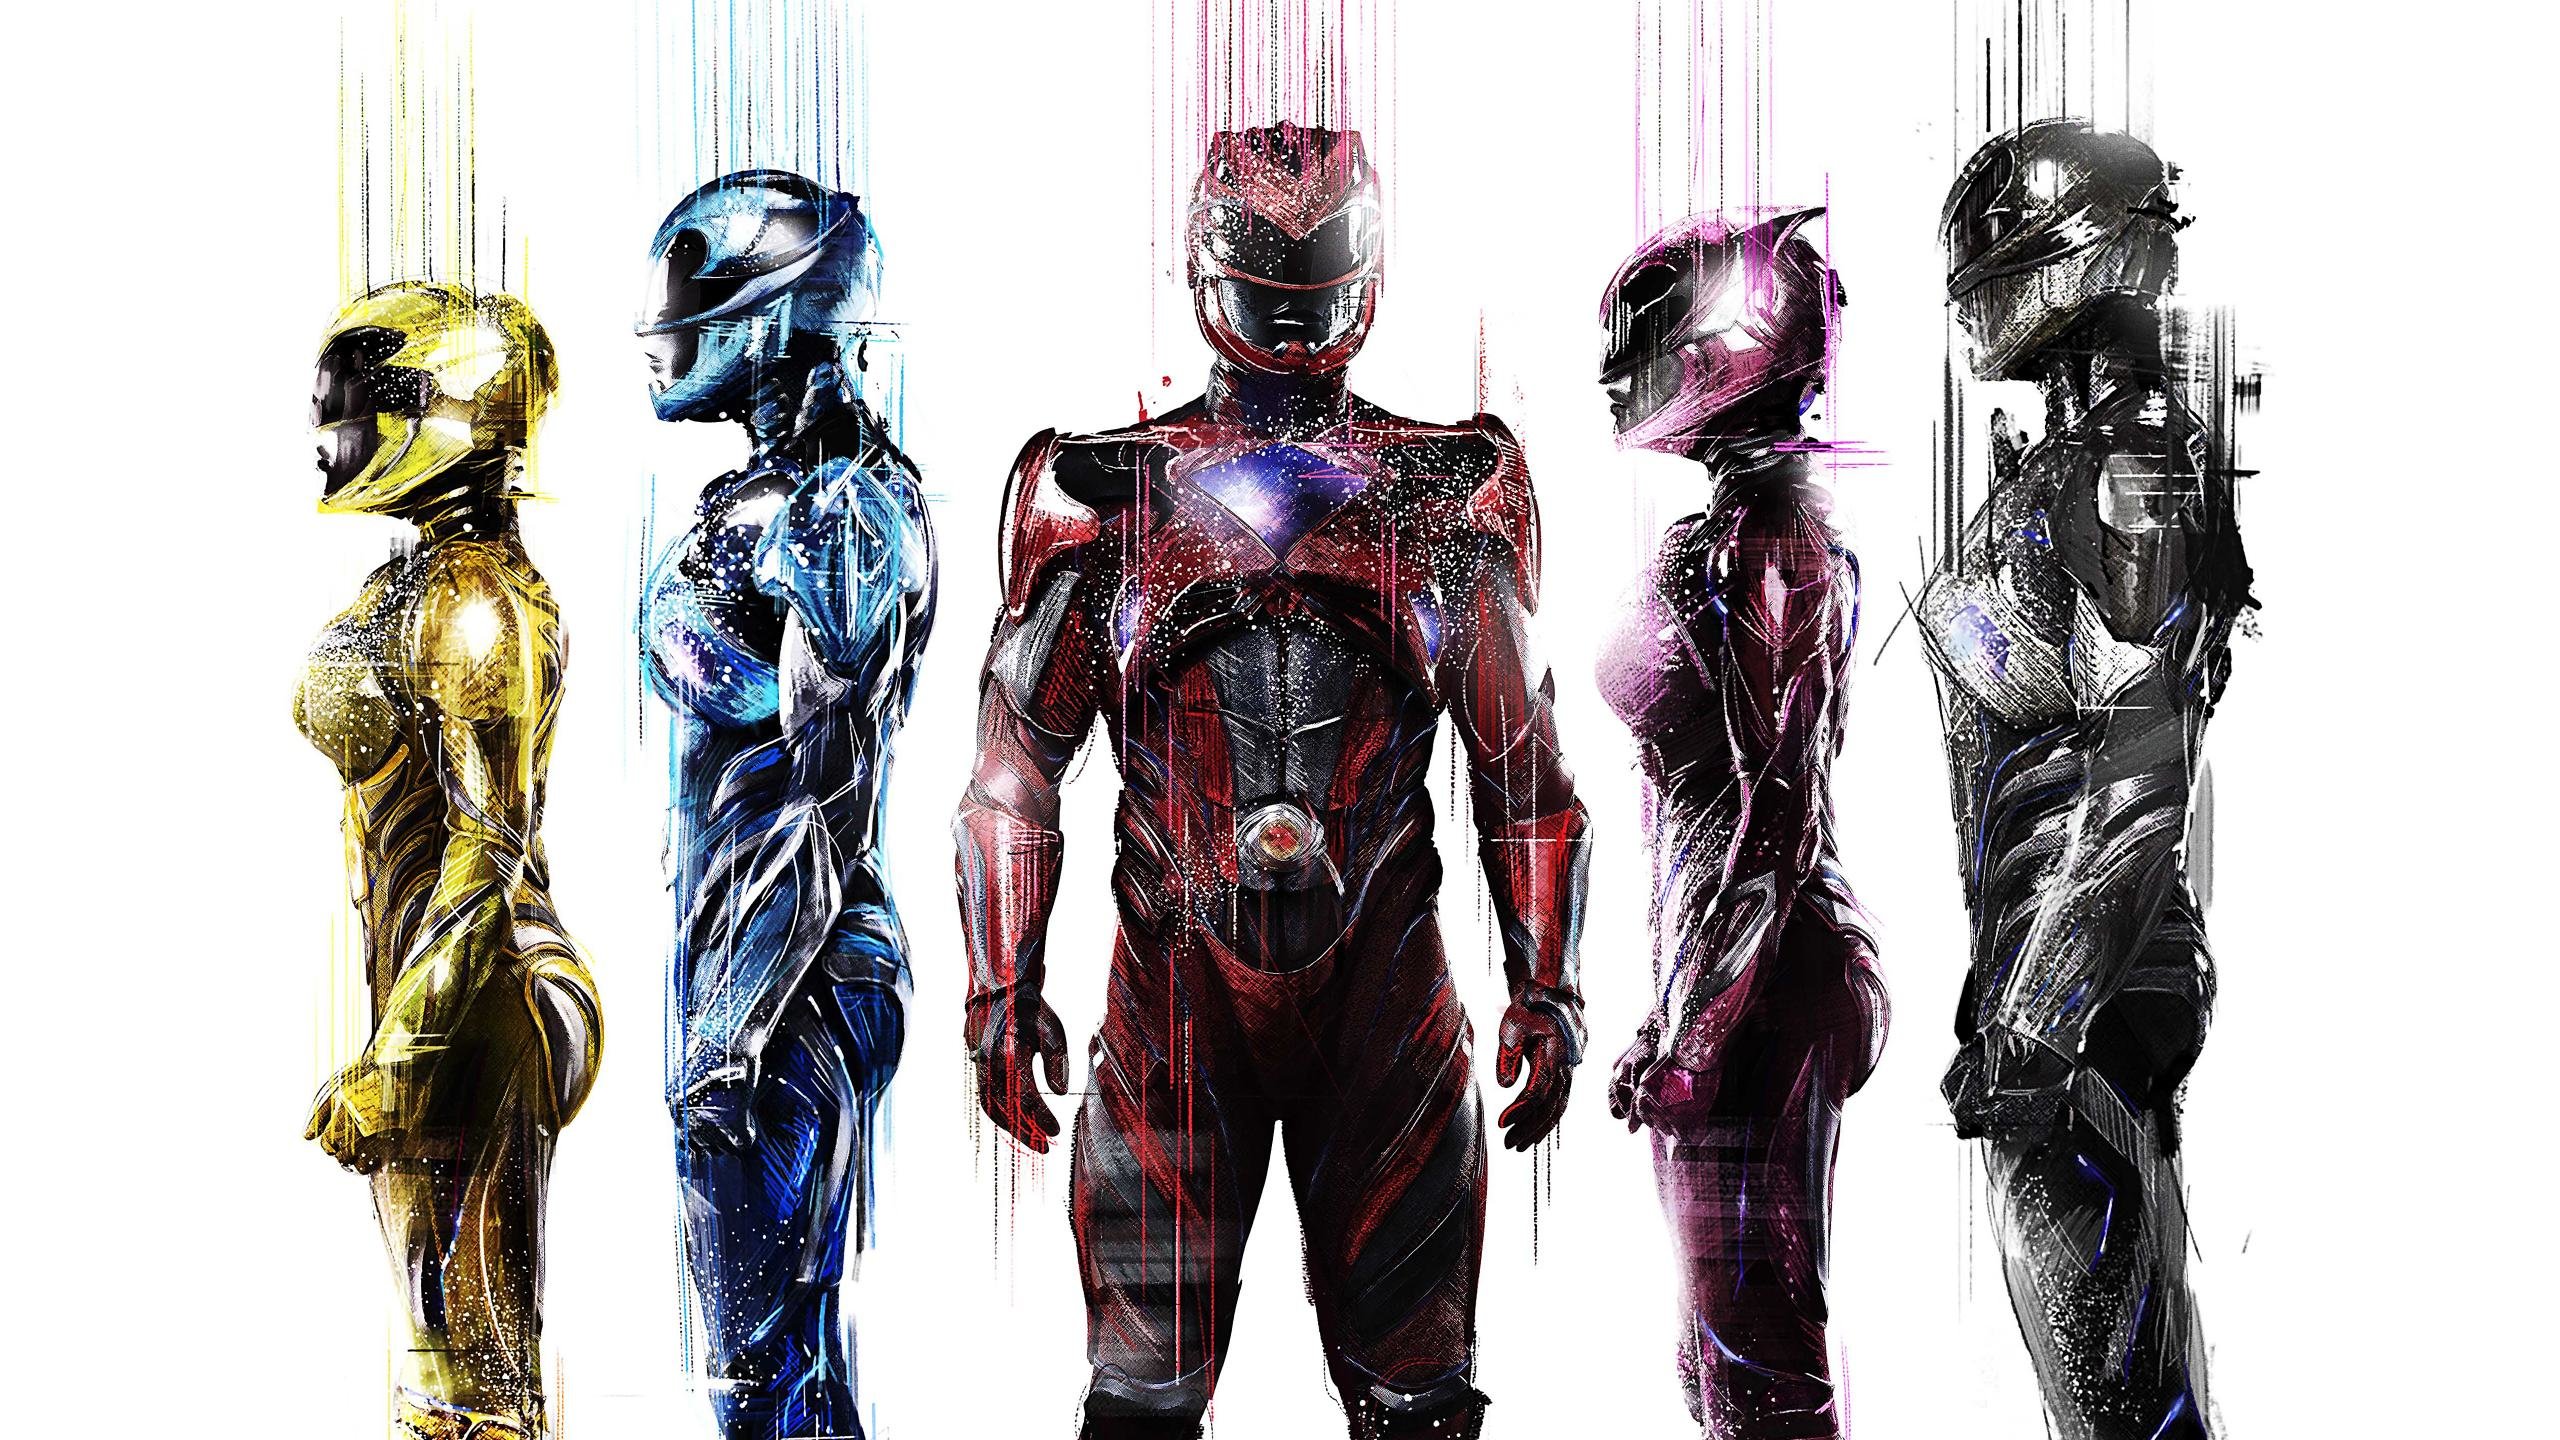 Best Power Rangers (2017) movie wallpaper ID:110617 for High Resolution hd 2560x1440 PC